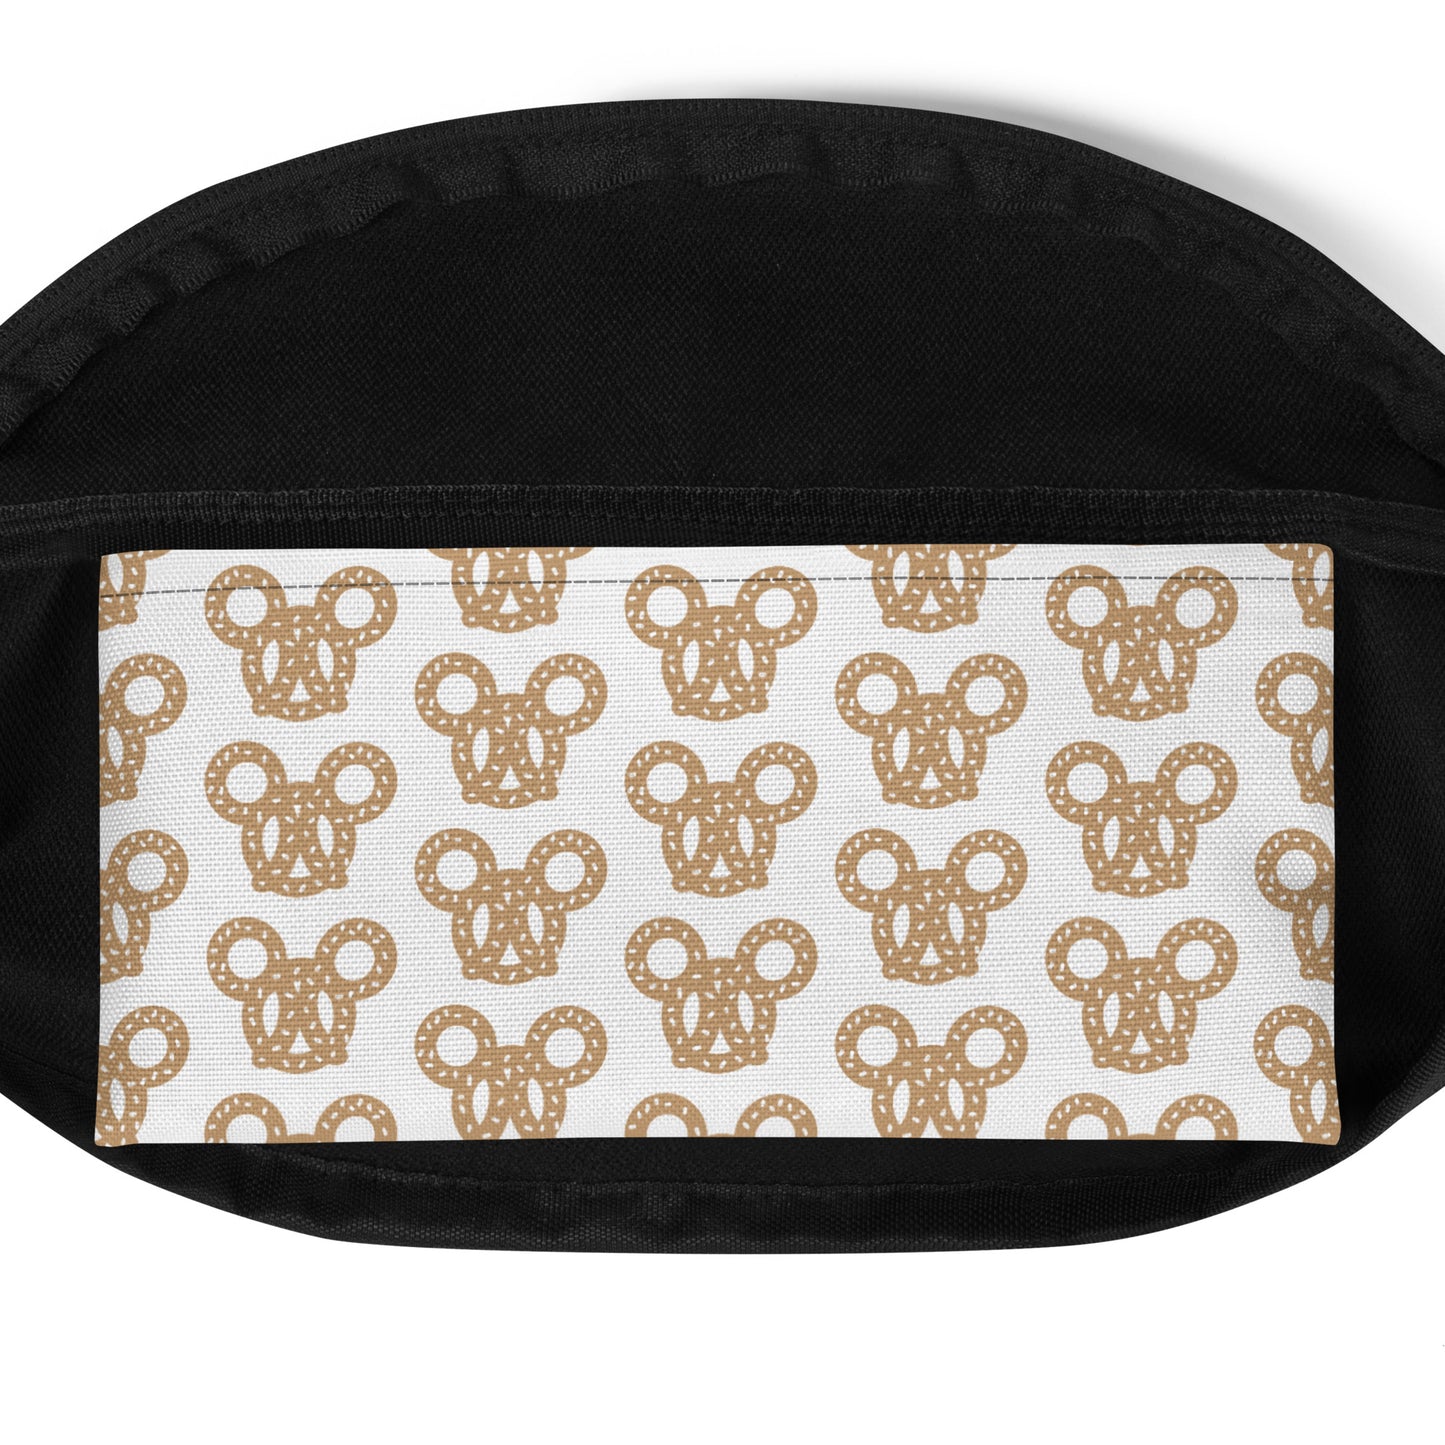 Salty Pretzel Fanny Pack - CraftNOLA Fanny Pack - Brown and White